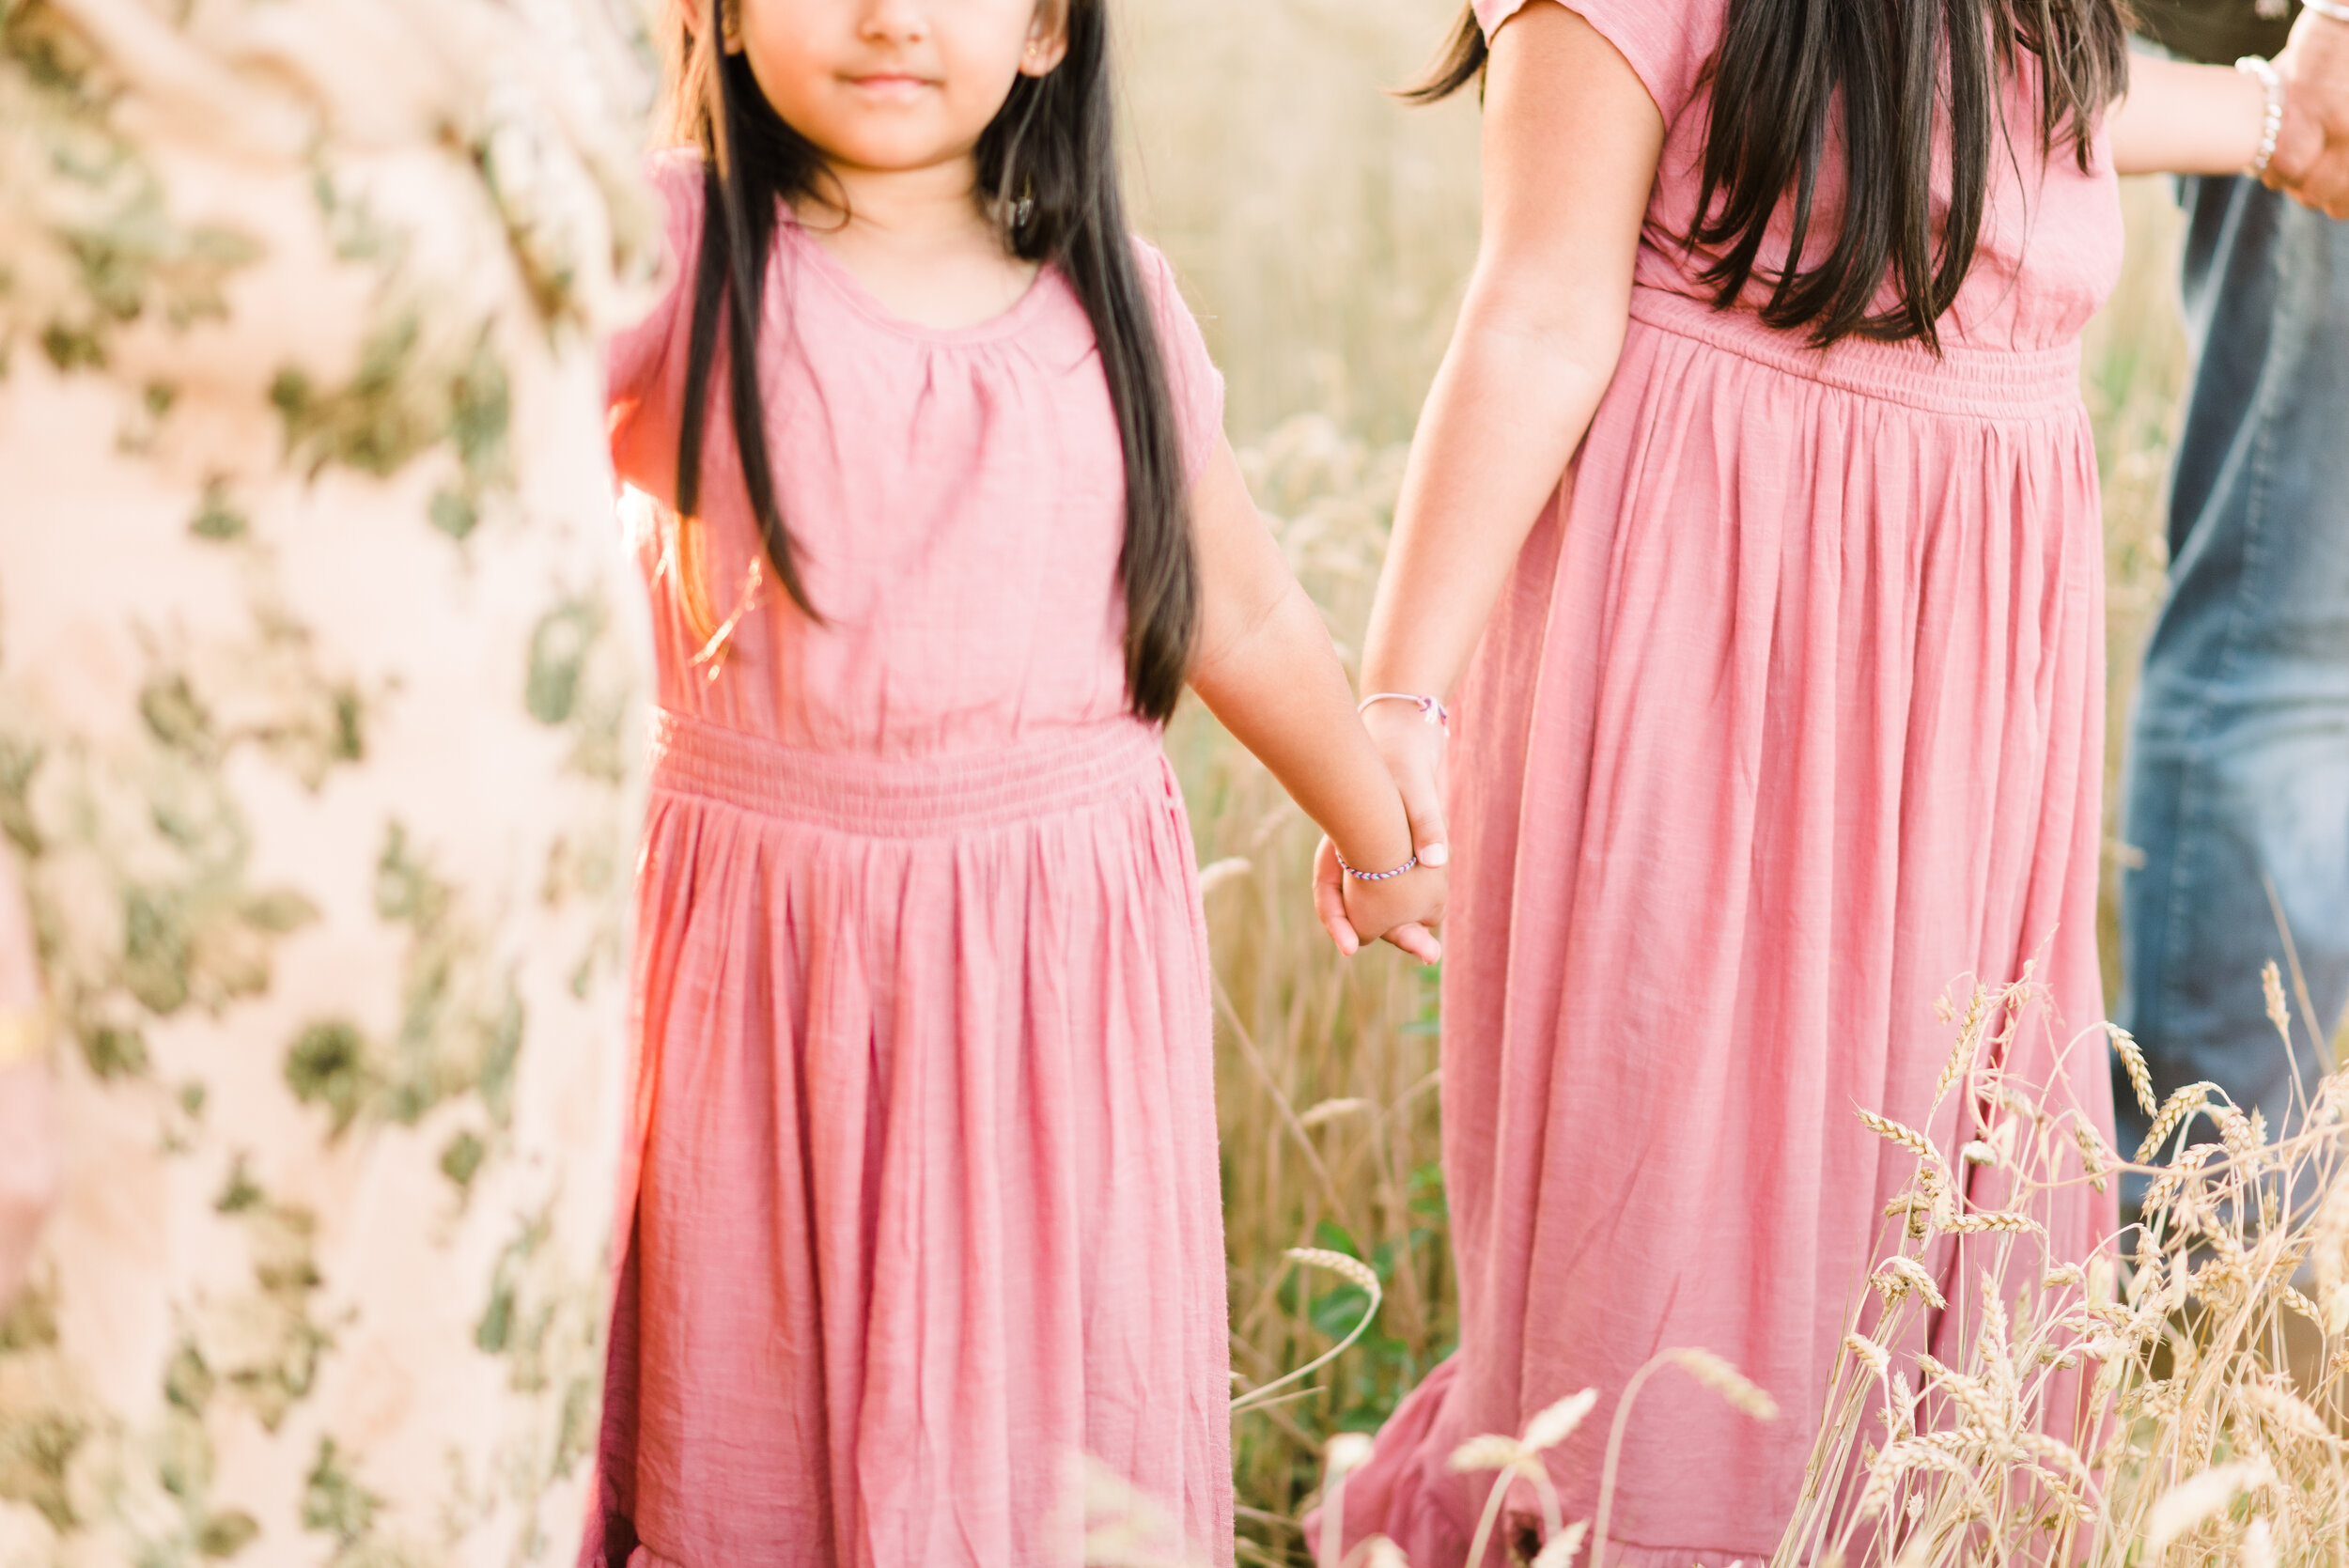 Afton Lewis Photography - Lynden Family Session -  (146).jpg